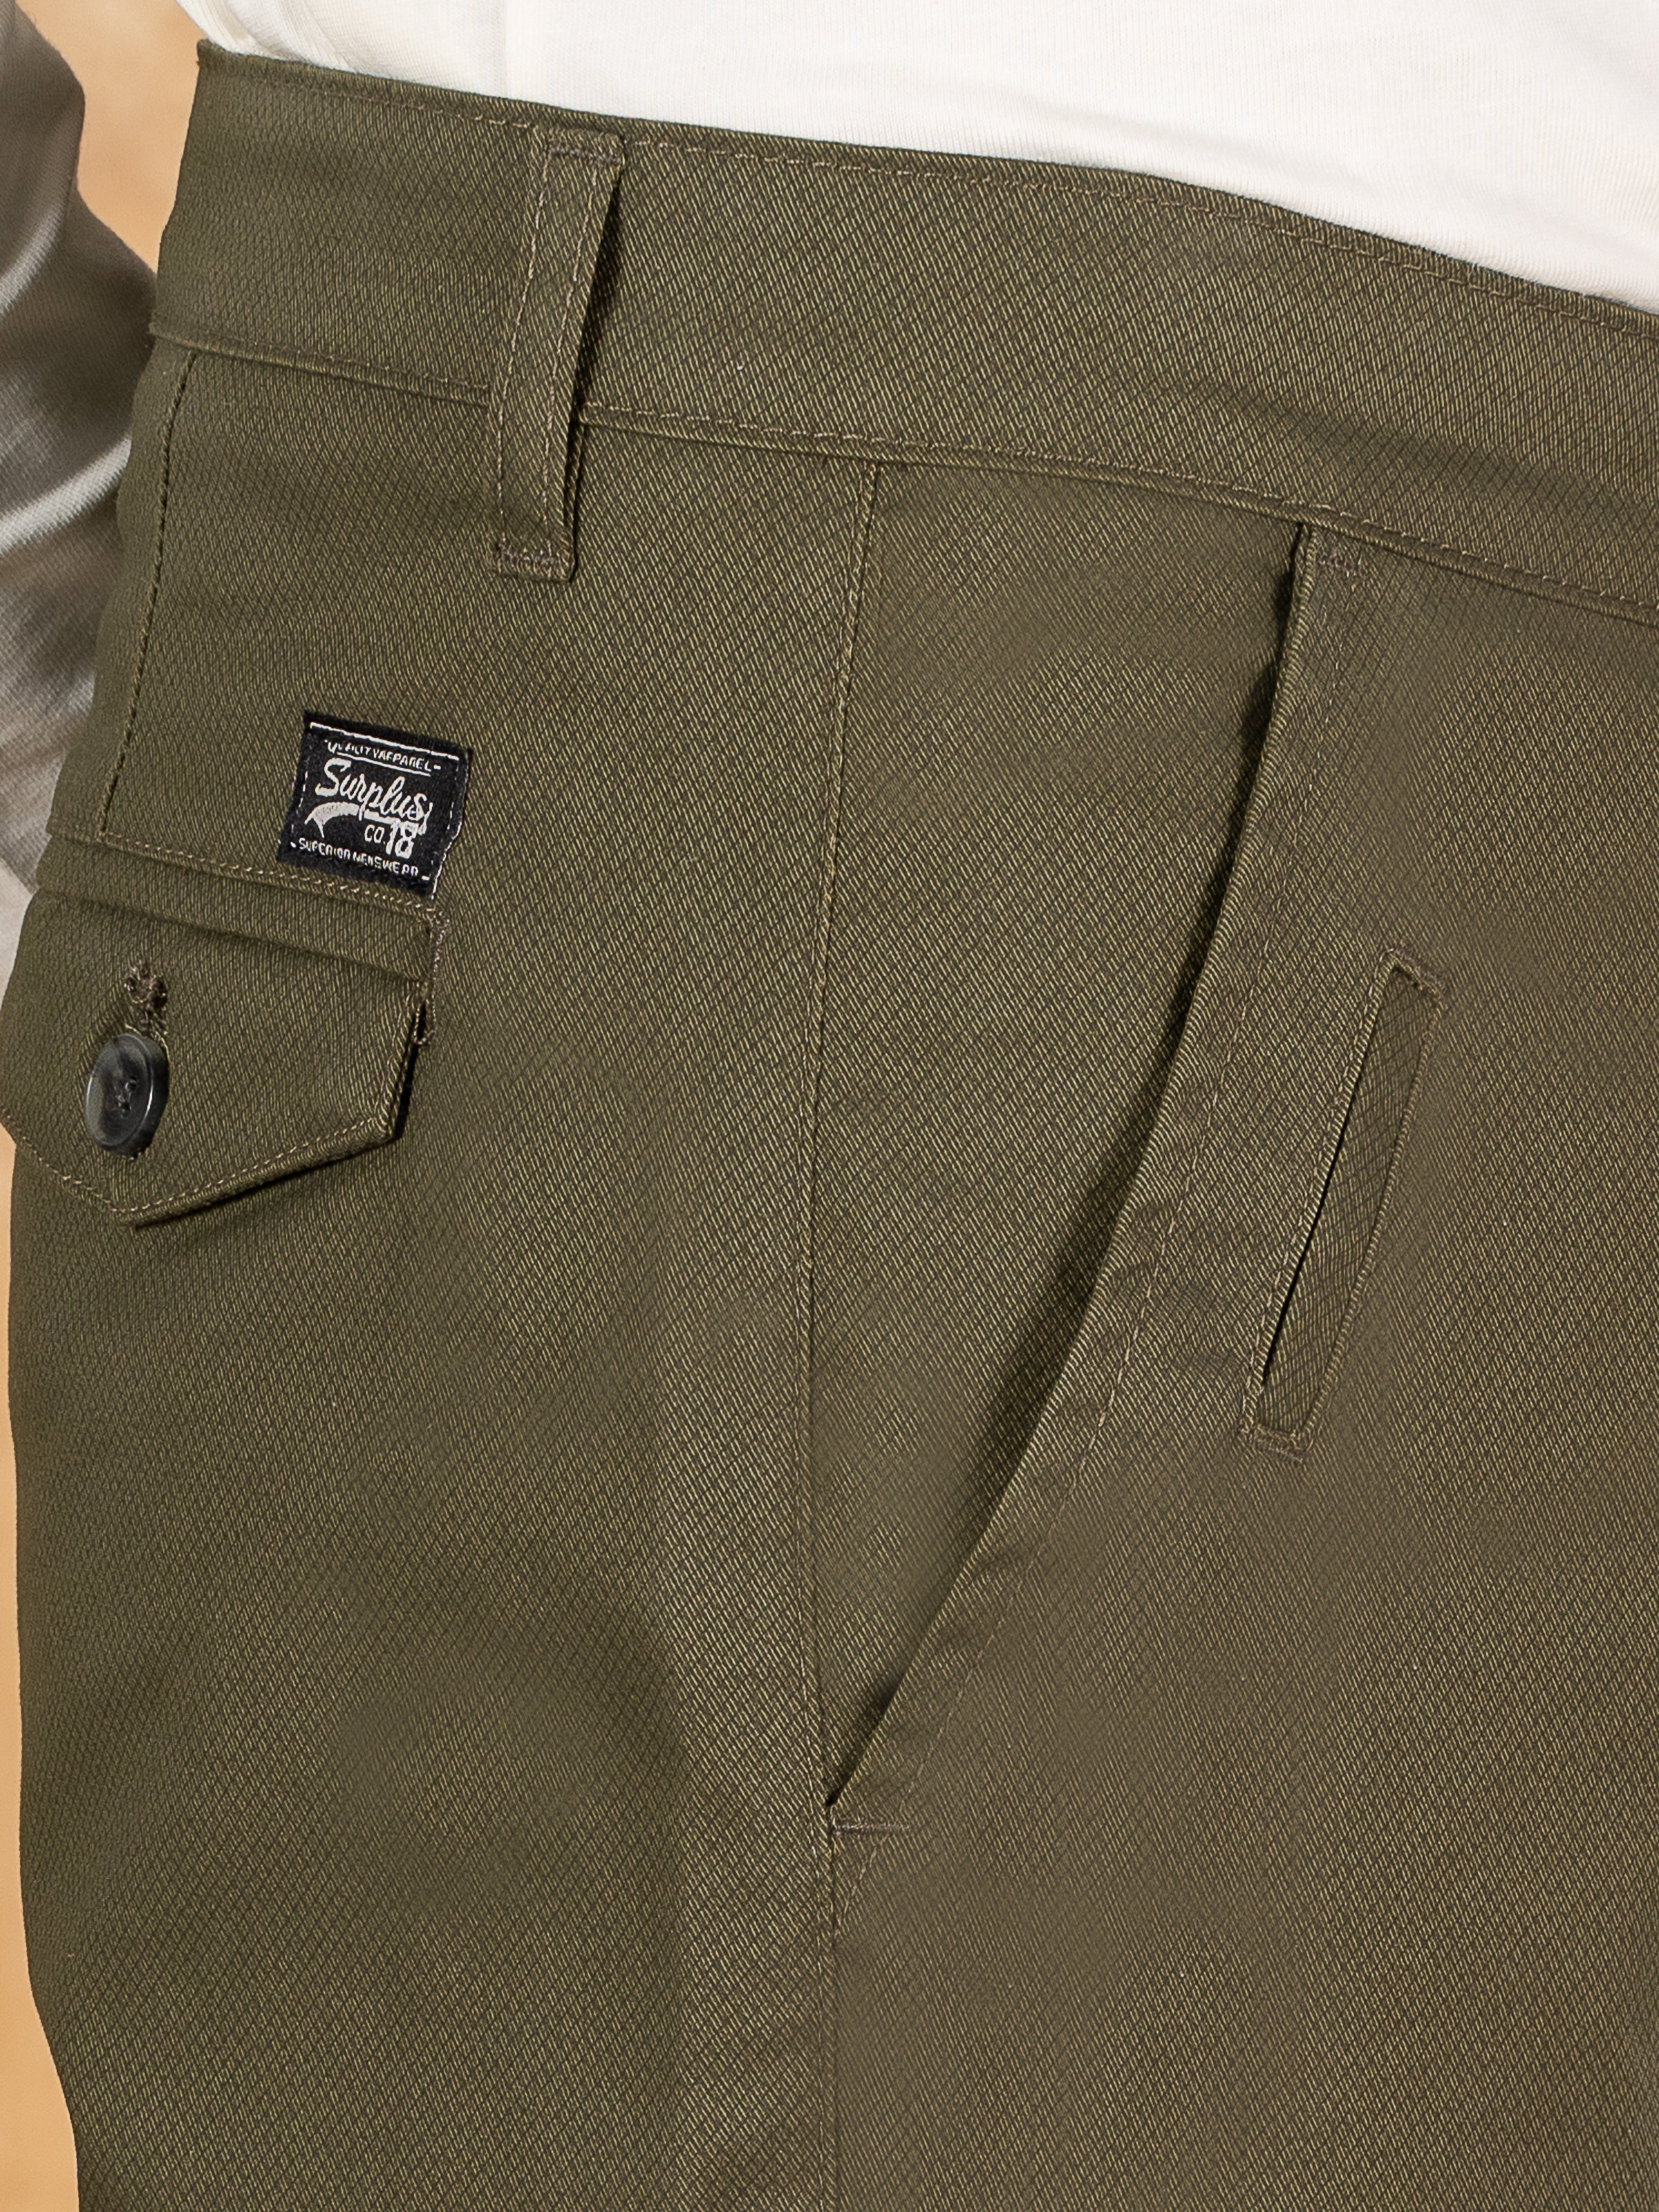 CASUAL PANT CROSS POCKET OLIVE PRINTED FABRIC